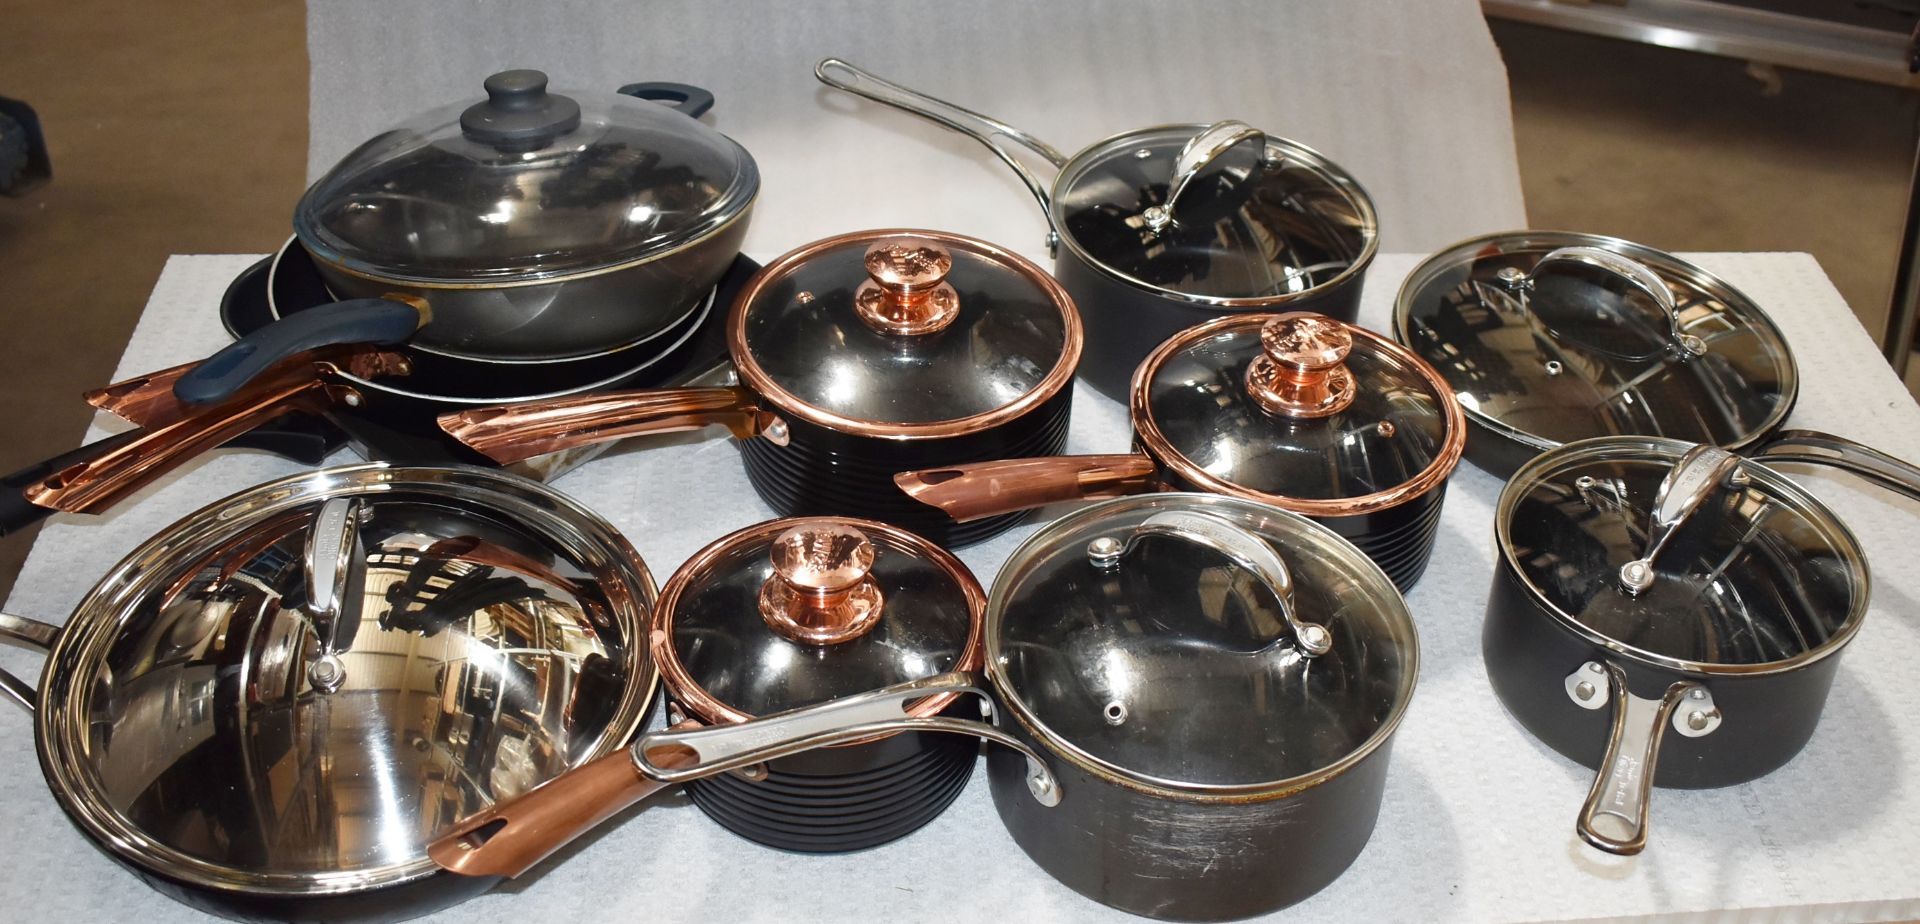 12 x Various Cooking Pans - Brands Include Jamie Oliver and Tower - Ref JP520 WH2 - NO VAT ON THE